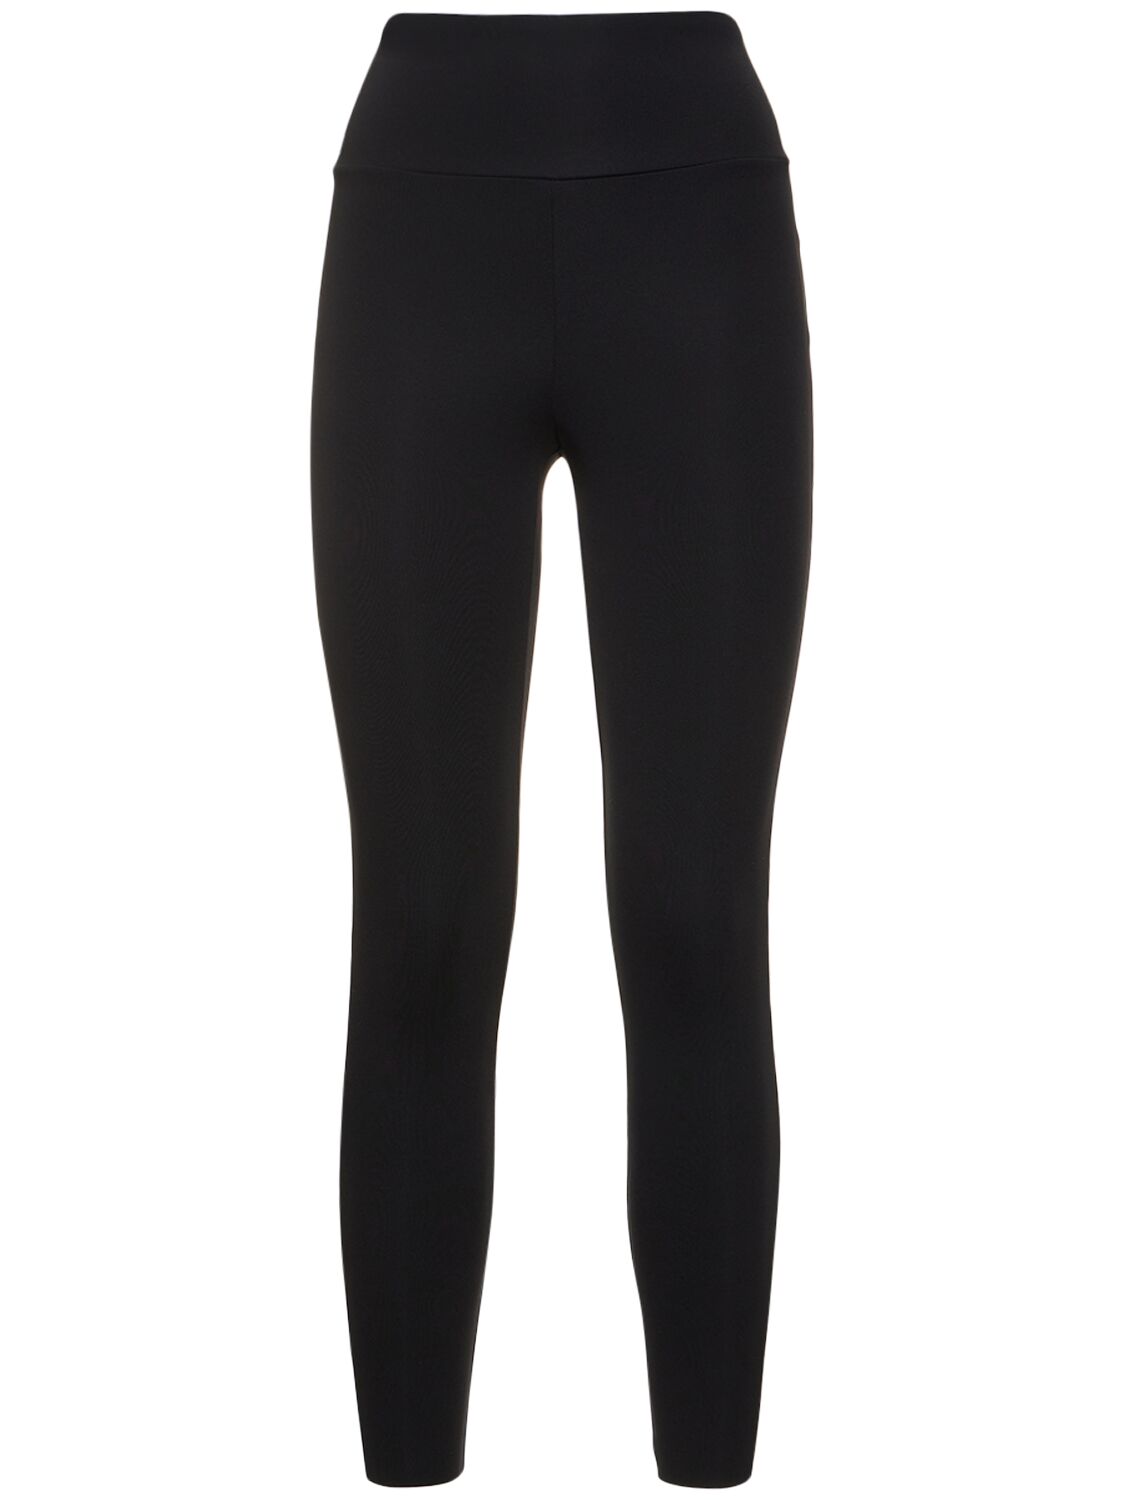 WOLFORD WARM UP SHAPING LEGGINGS